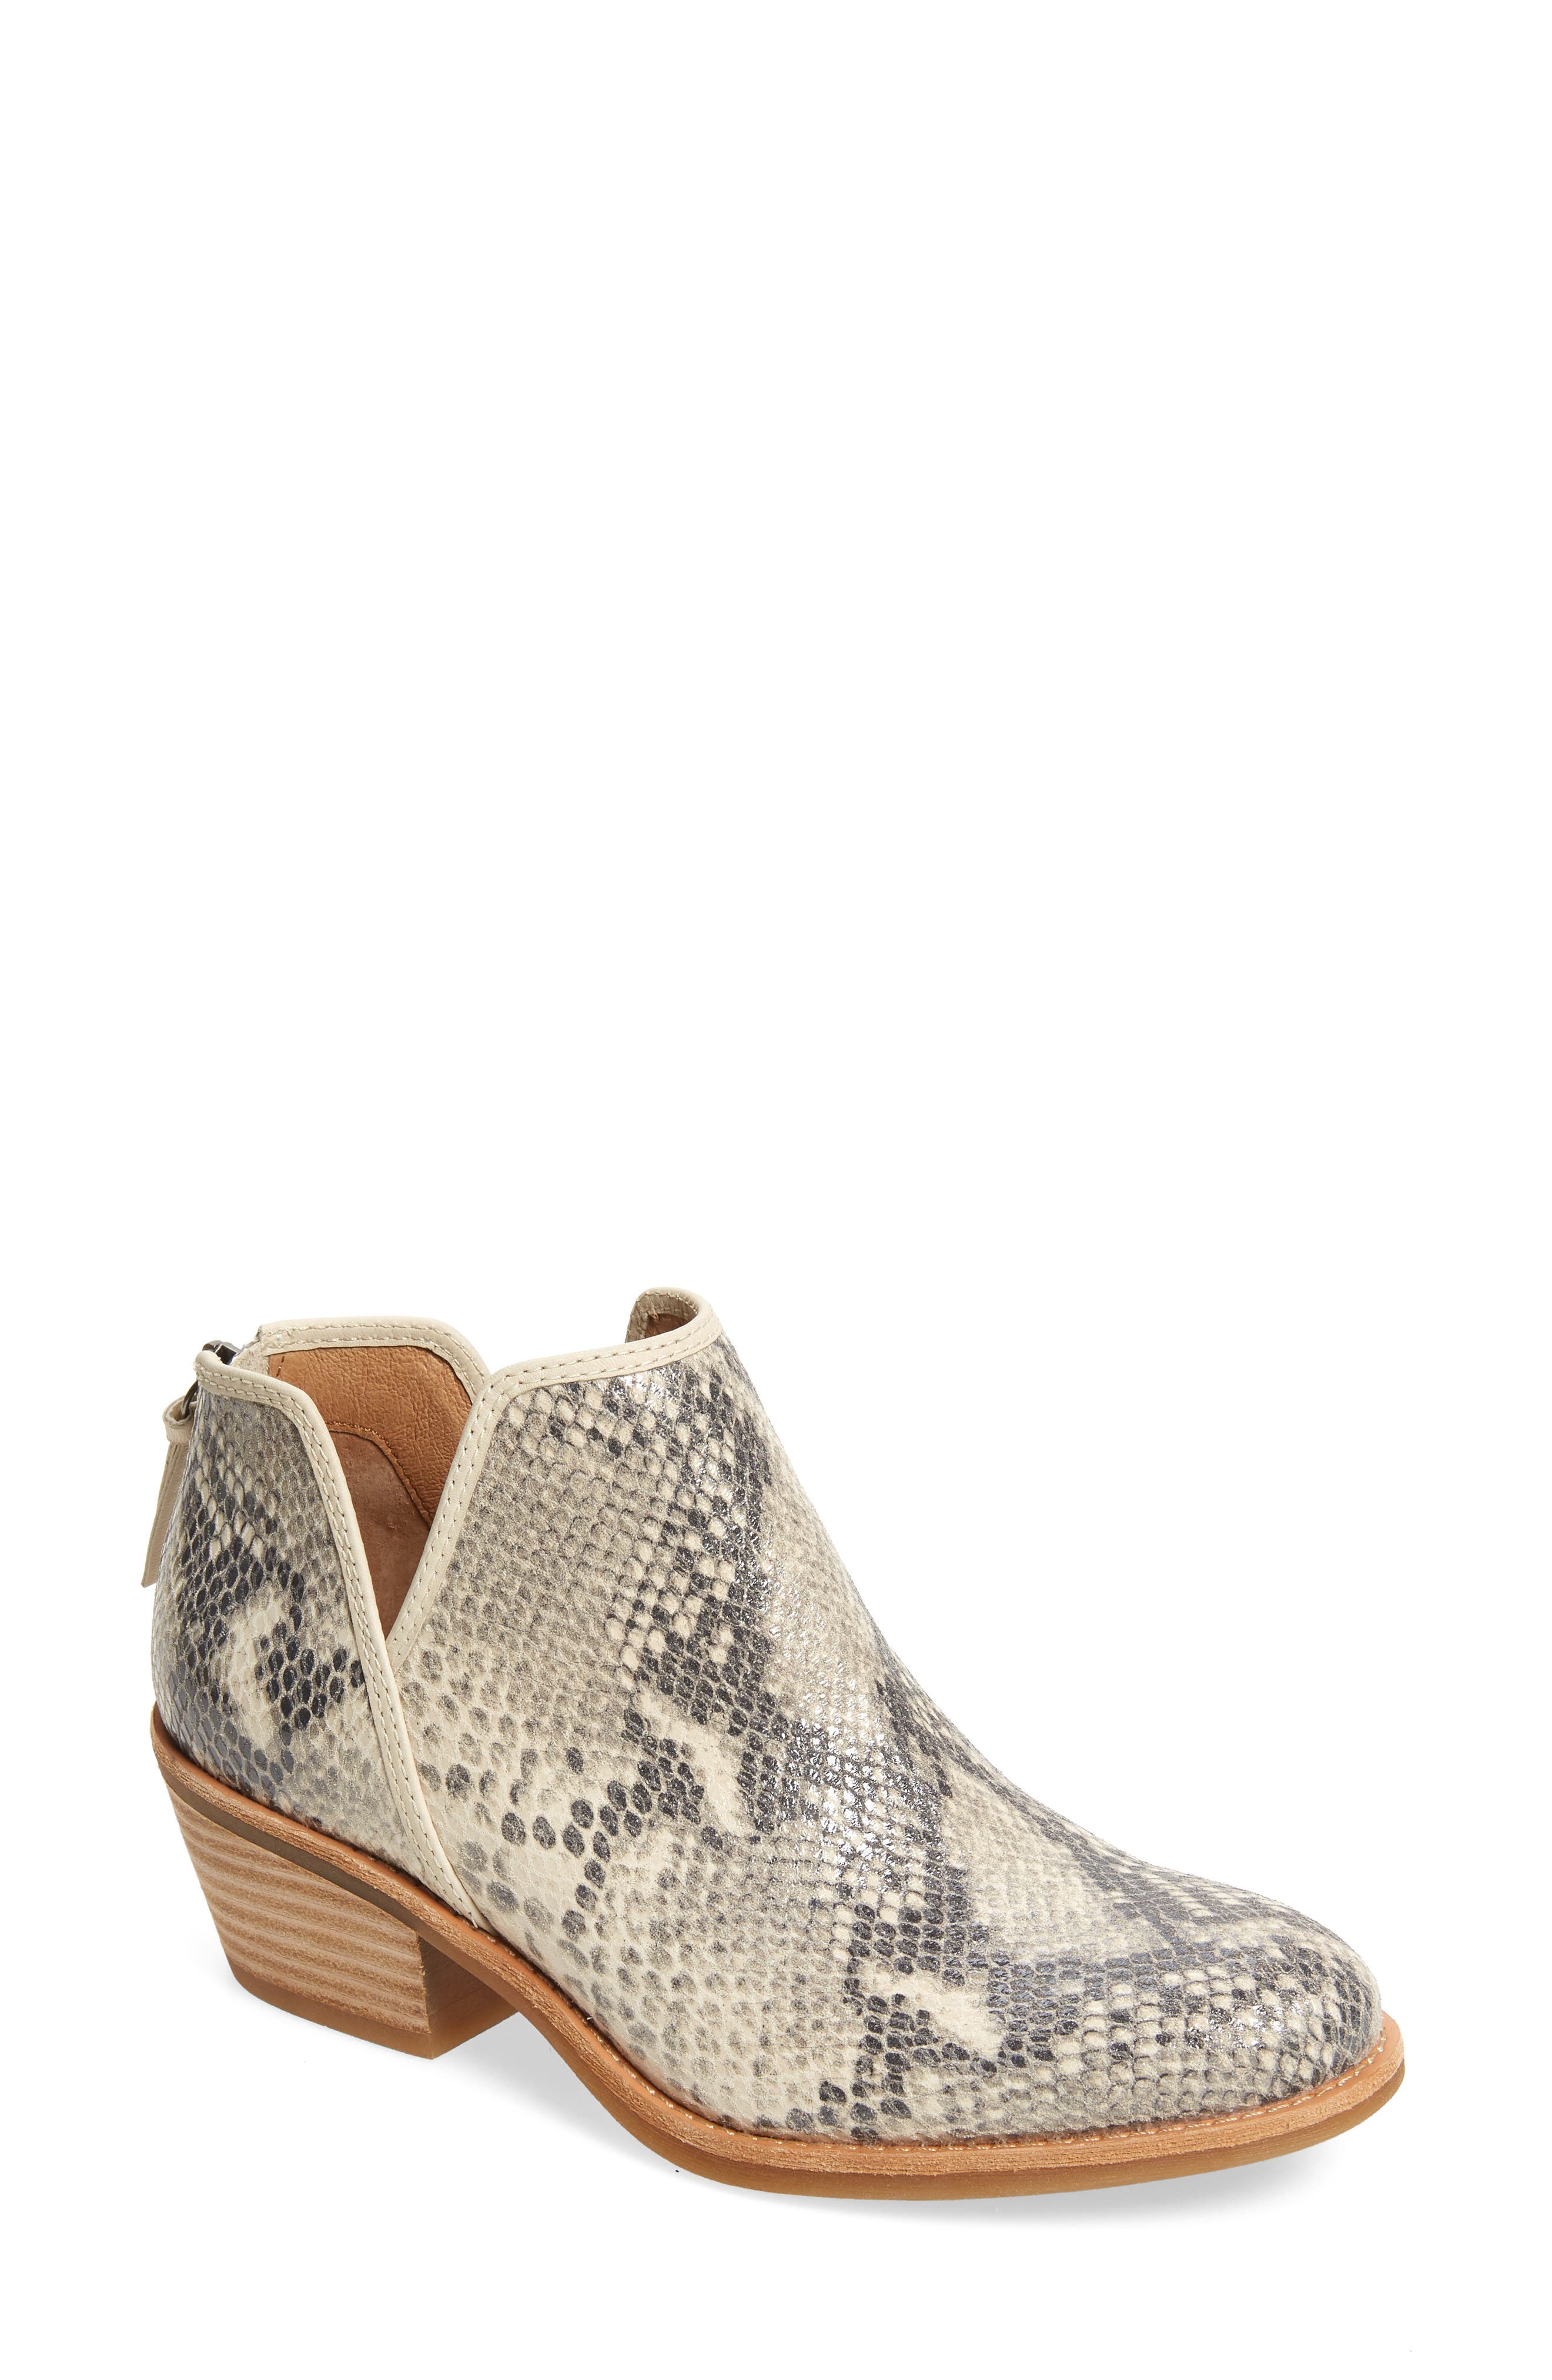 sofft womens booties